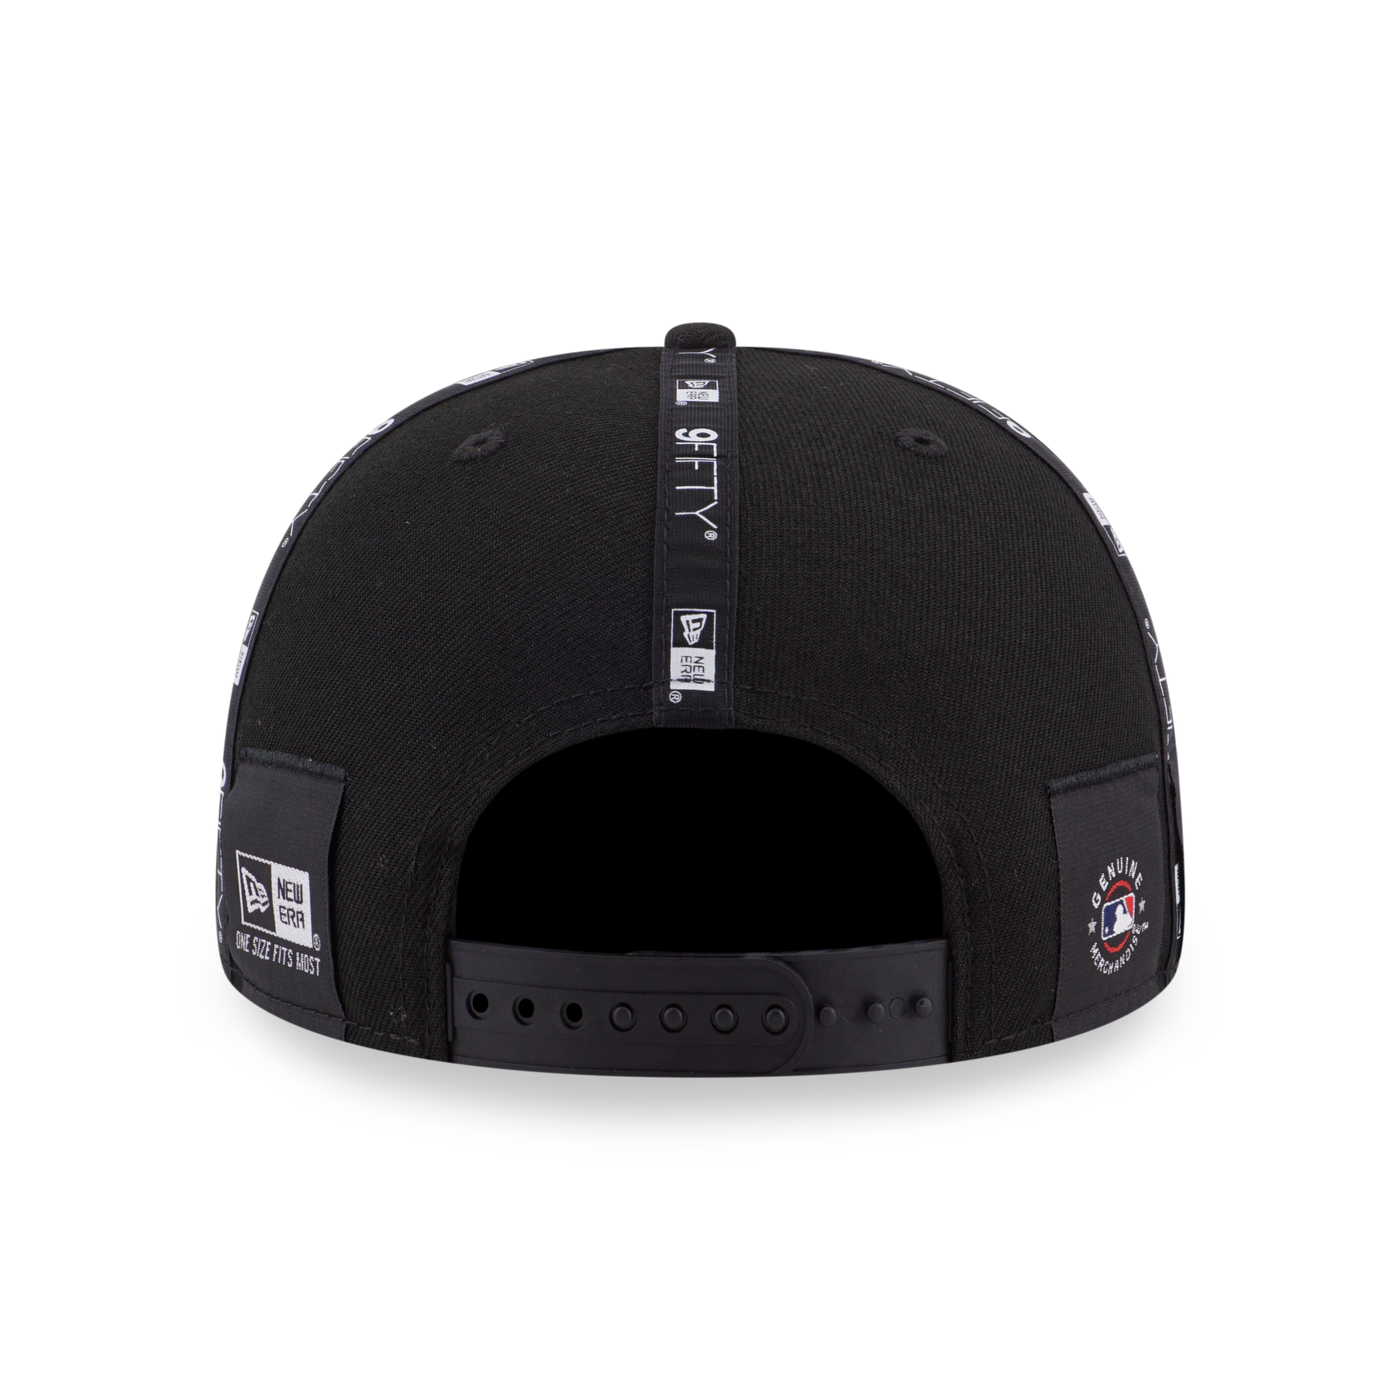 LOS ANGELES DODGERS INSIDE OUT DODGERS BLACK 9FIFTY CAP